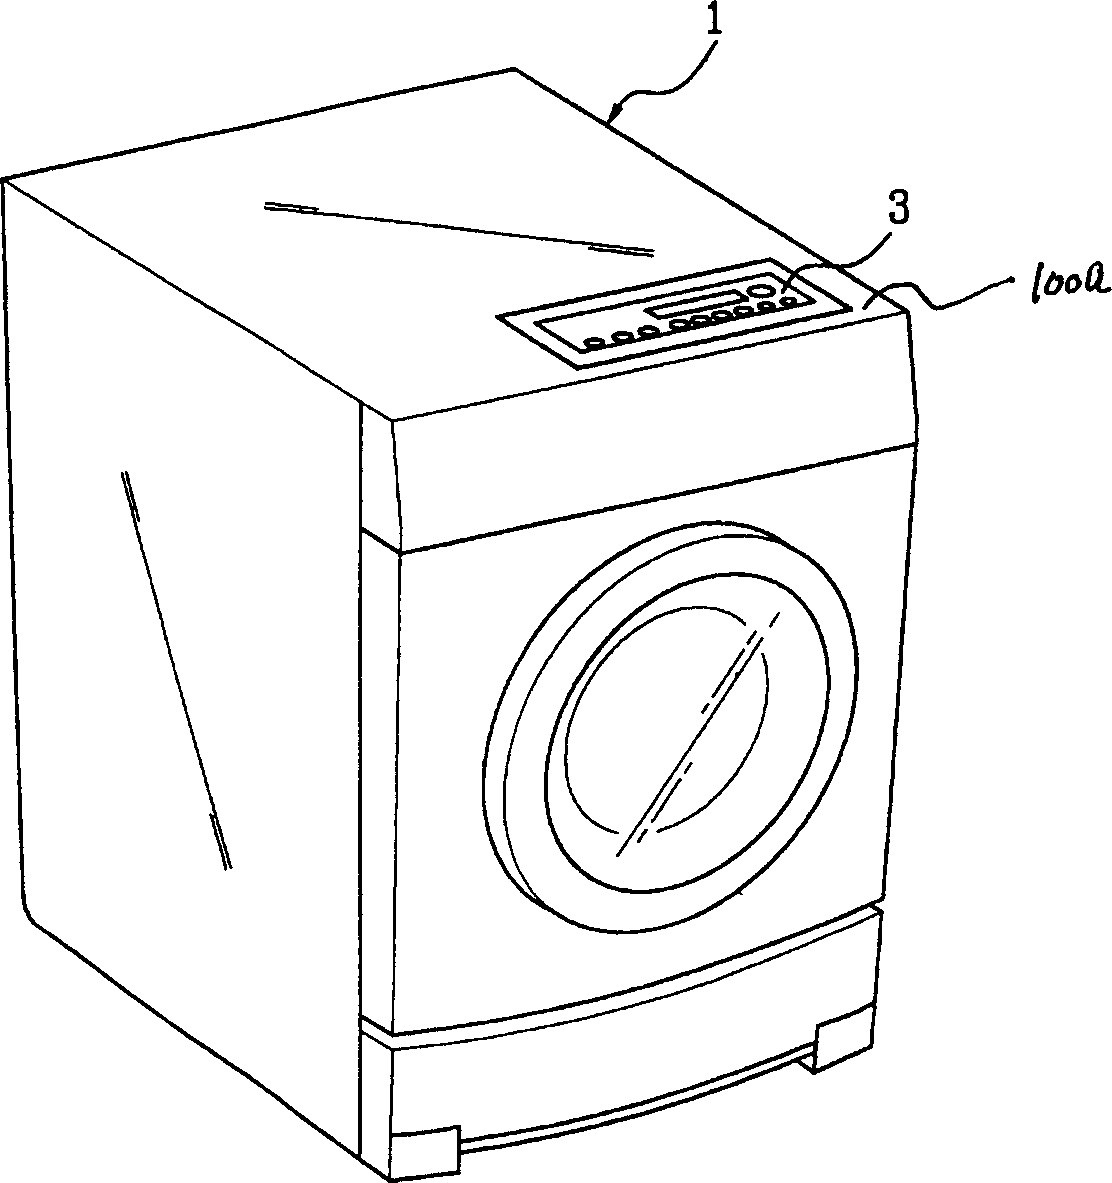 Control panel capable of adjusting inclined angle for drum washing machine